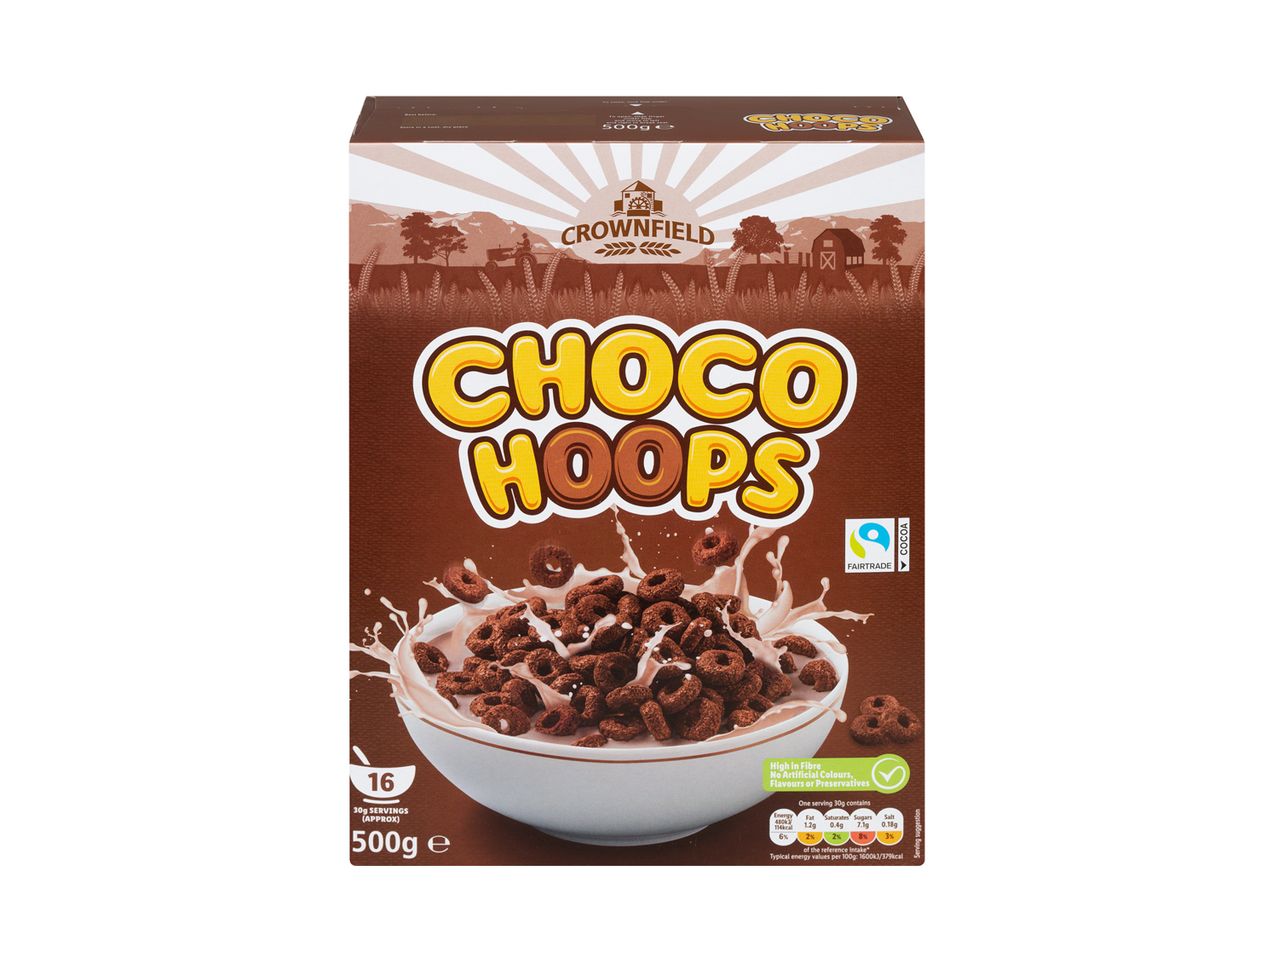 Go to full screen view: Crownfield Choco Hoops - Image 1